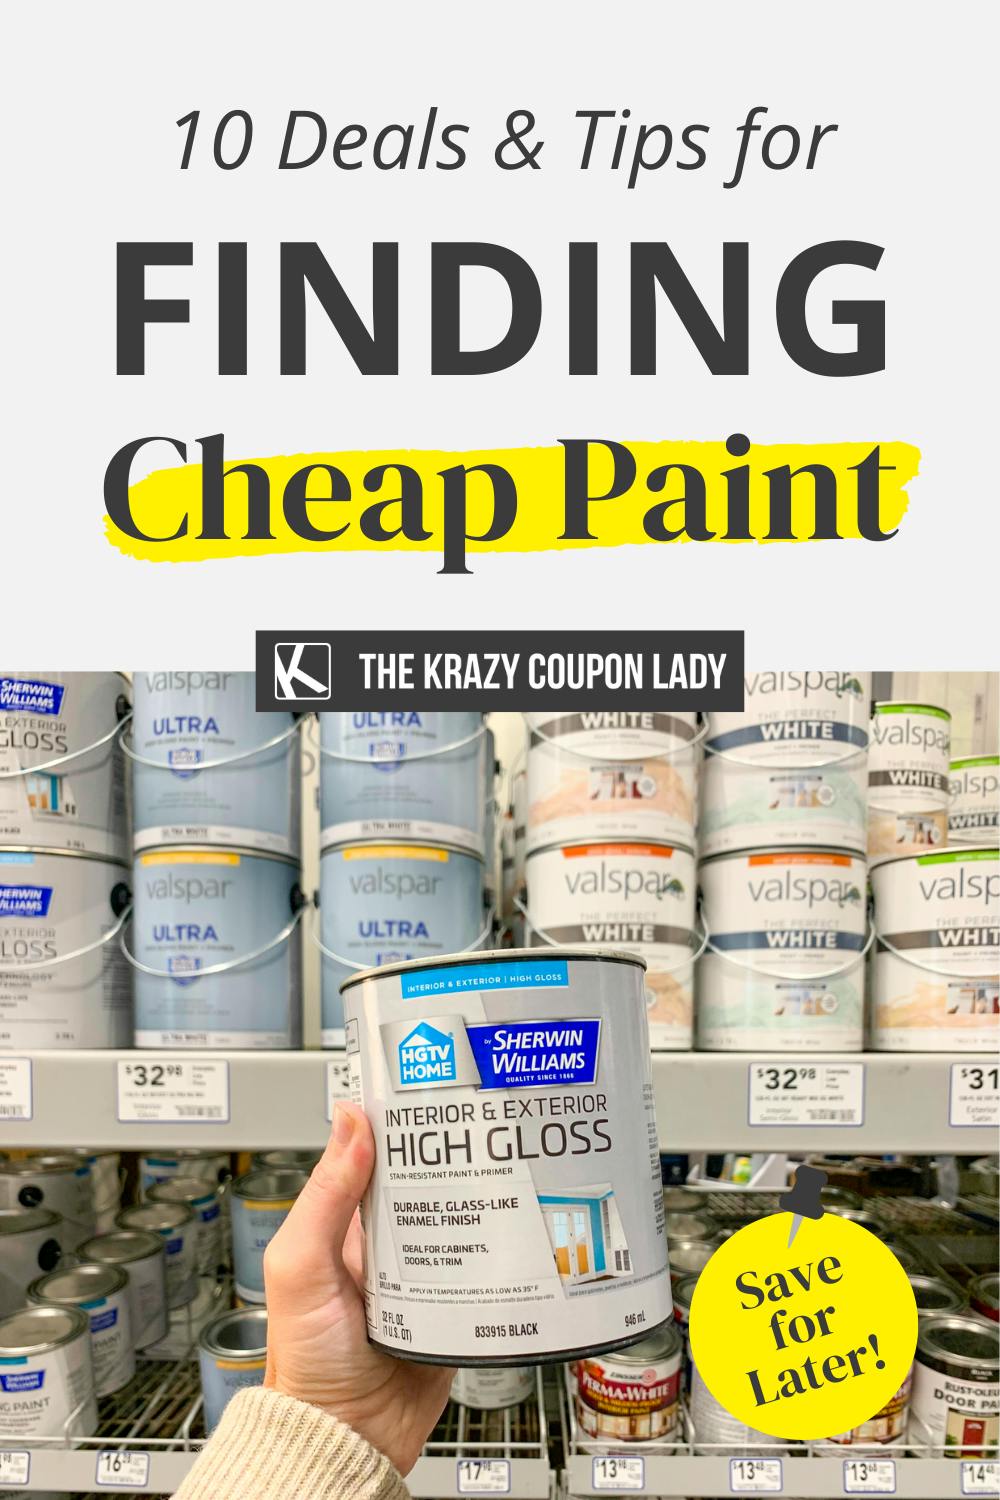 10 Best Deals and Tips for Finding Cheap Paint Near You